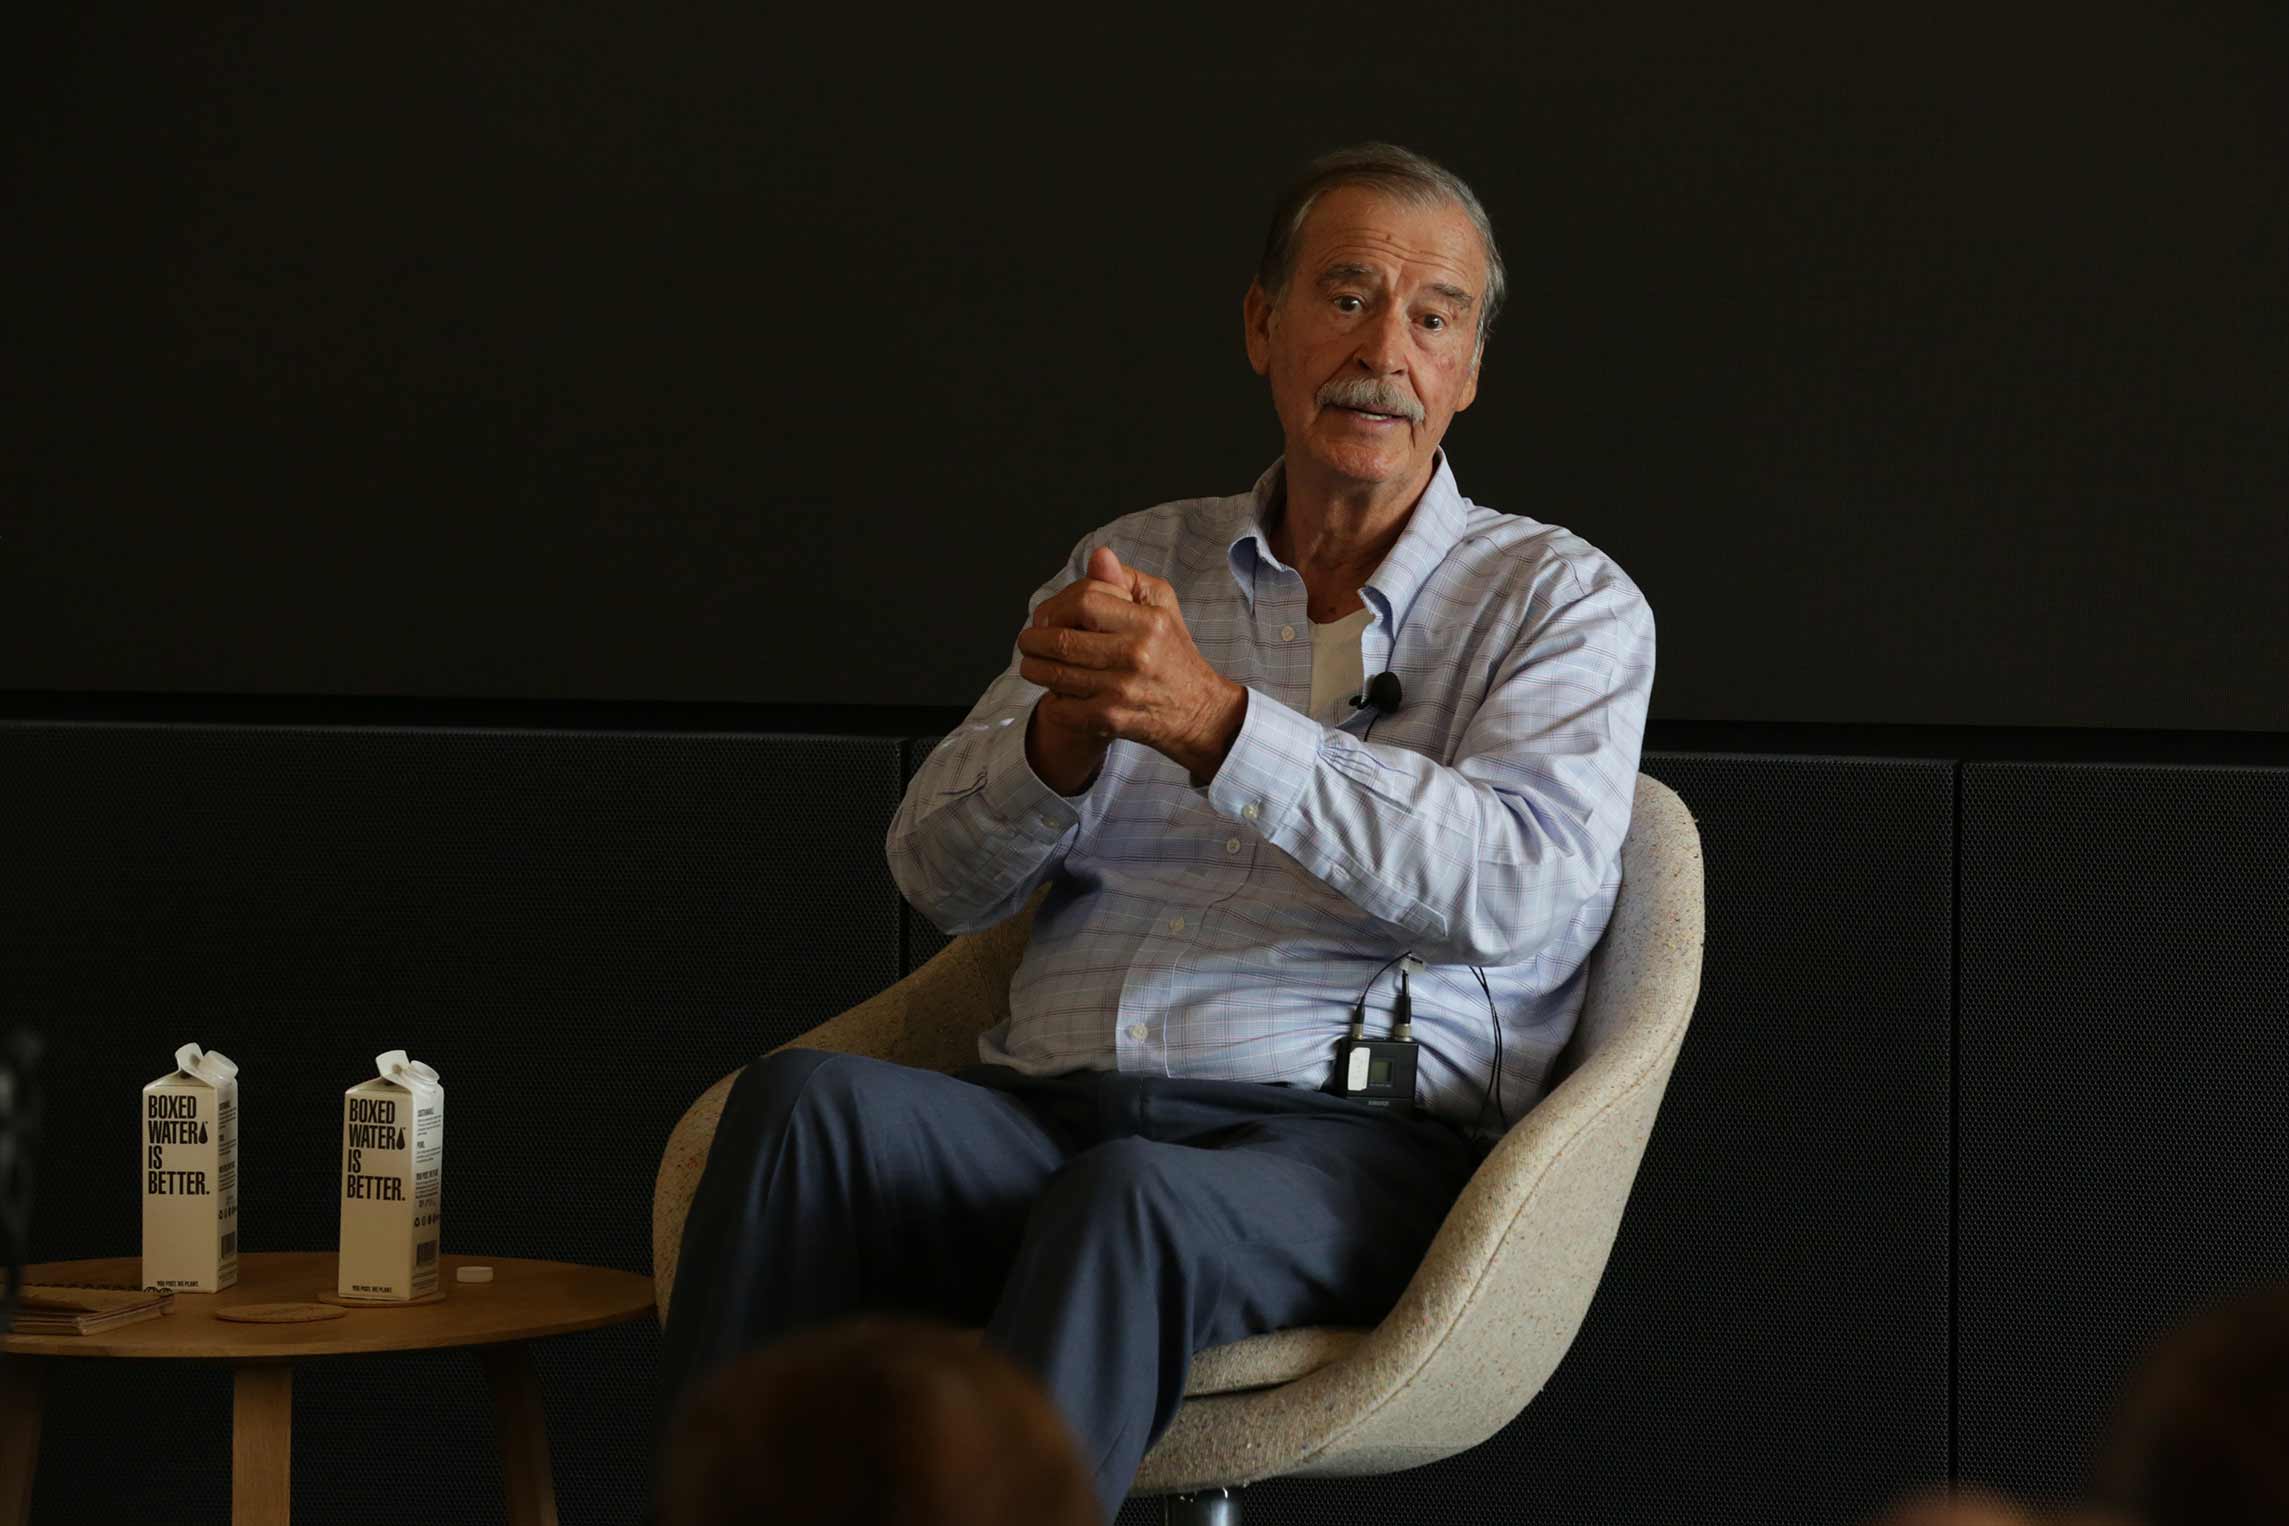 Former President of Mexico Vicente Fox Visits UC San Diego Park & Market